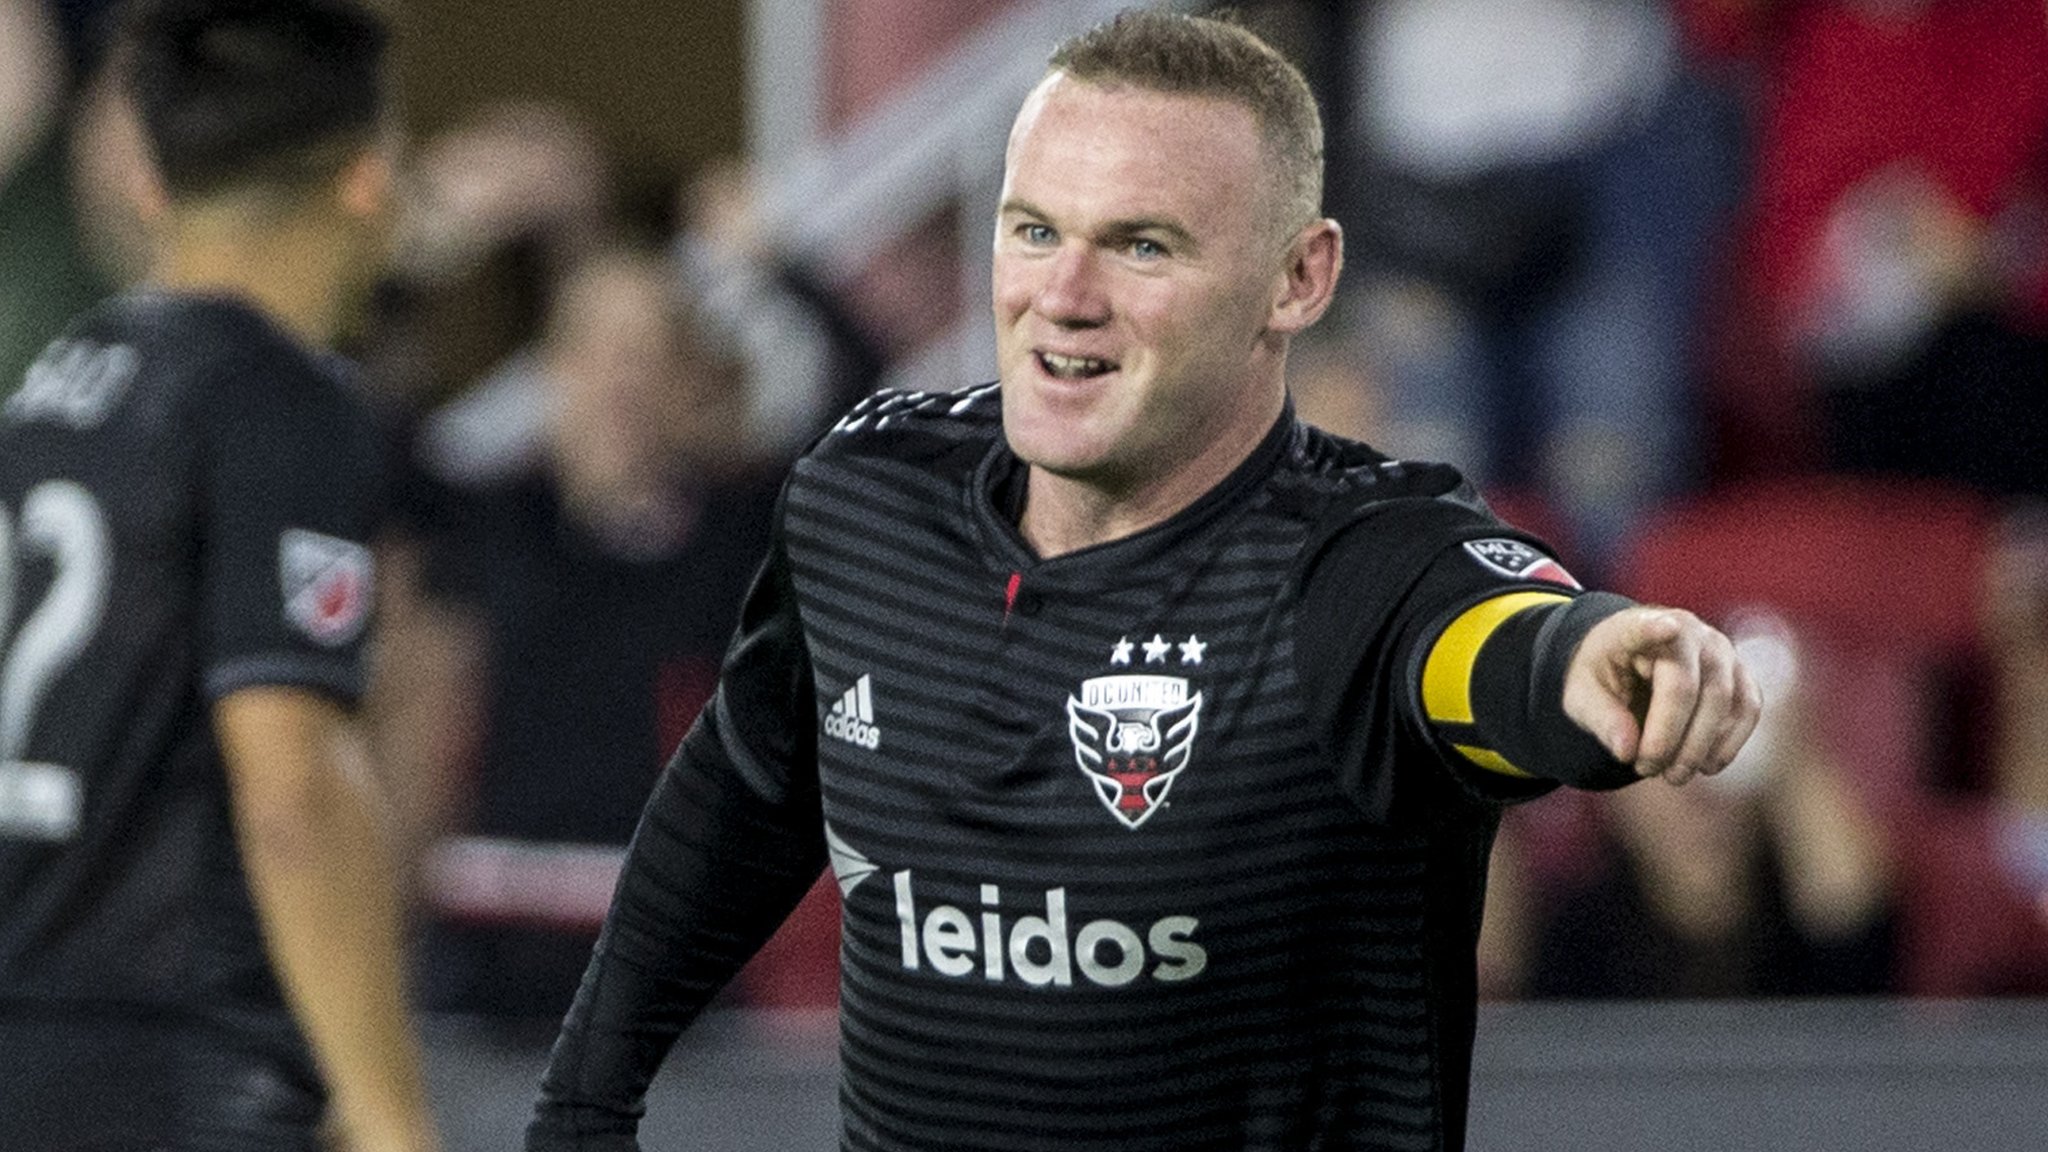 Rooney's assist helps DC United move into play-offs positions